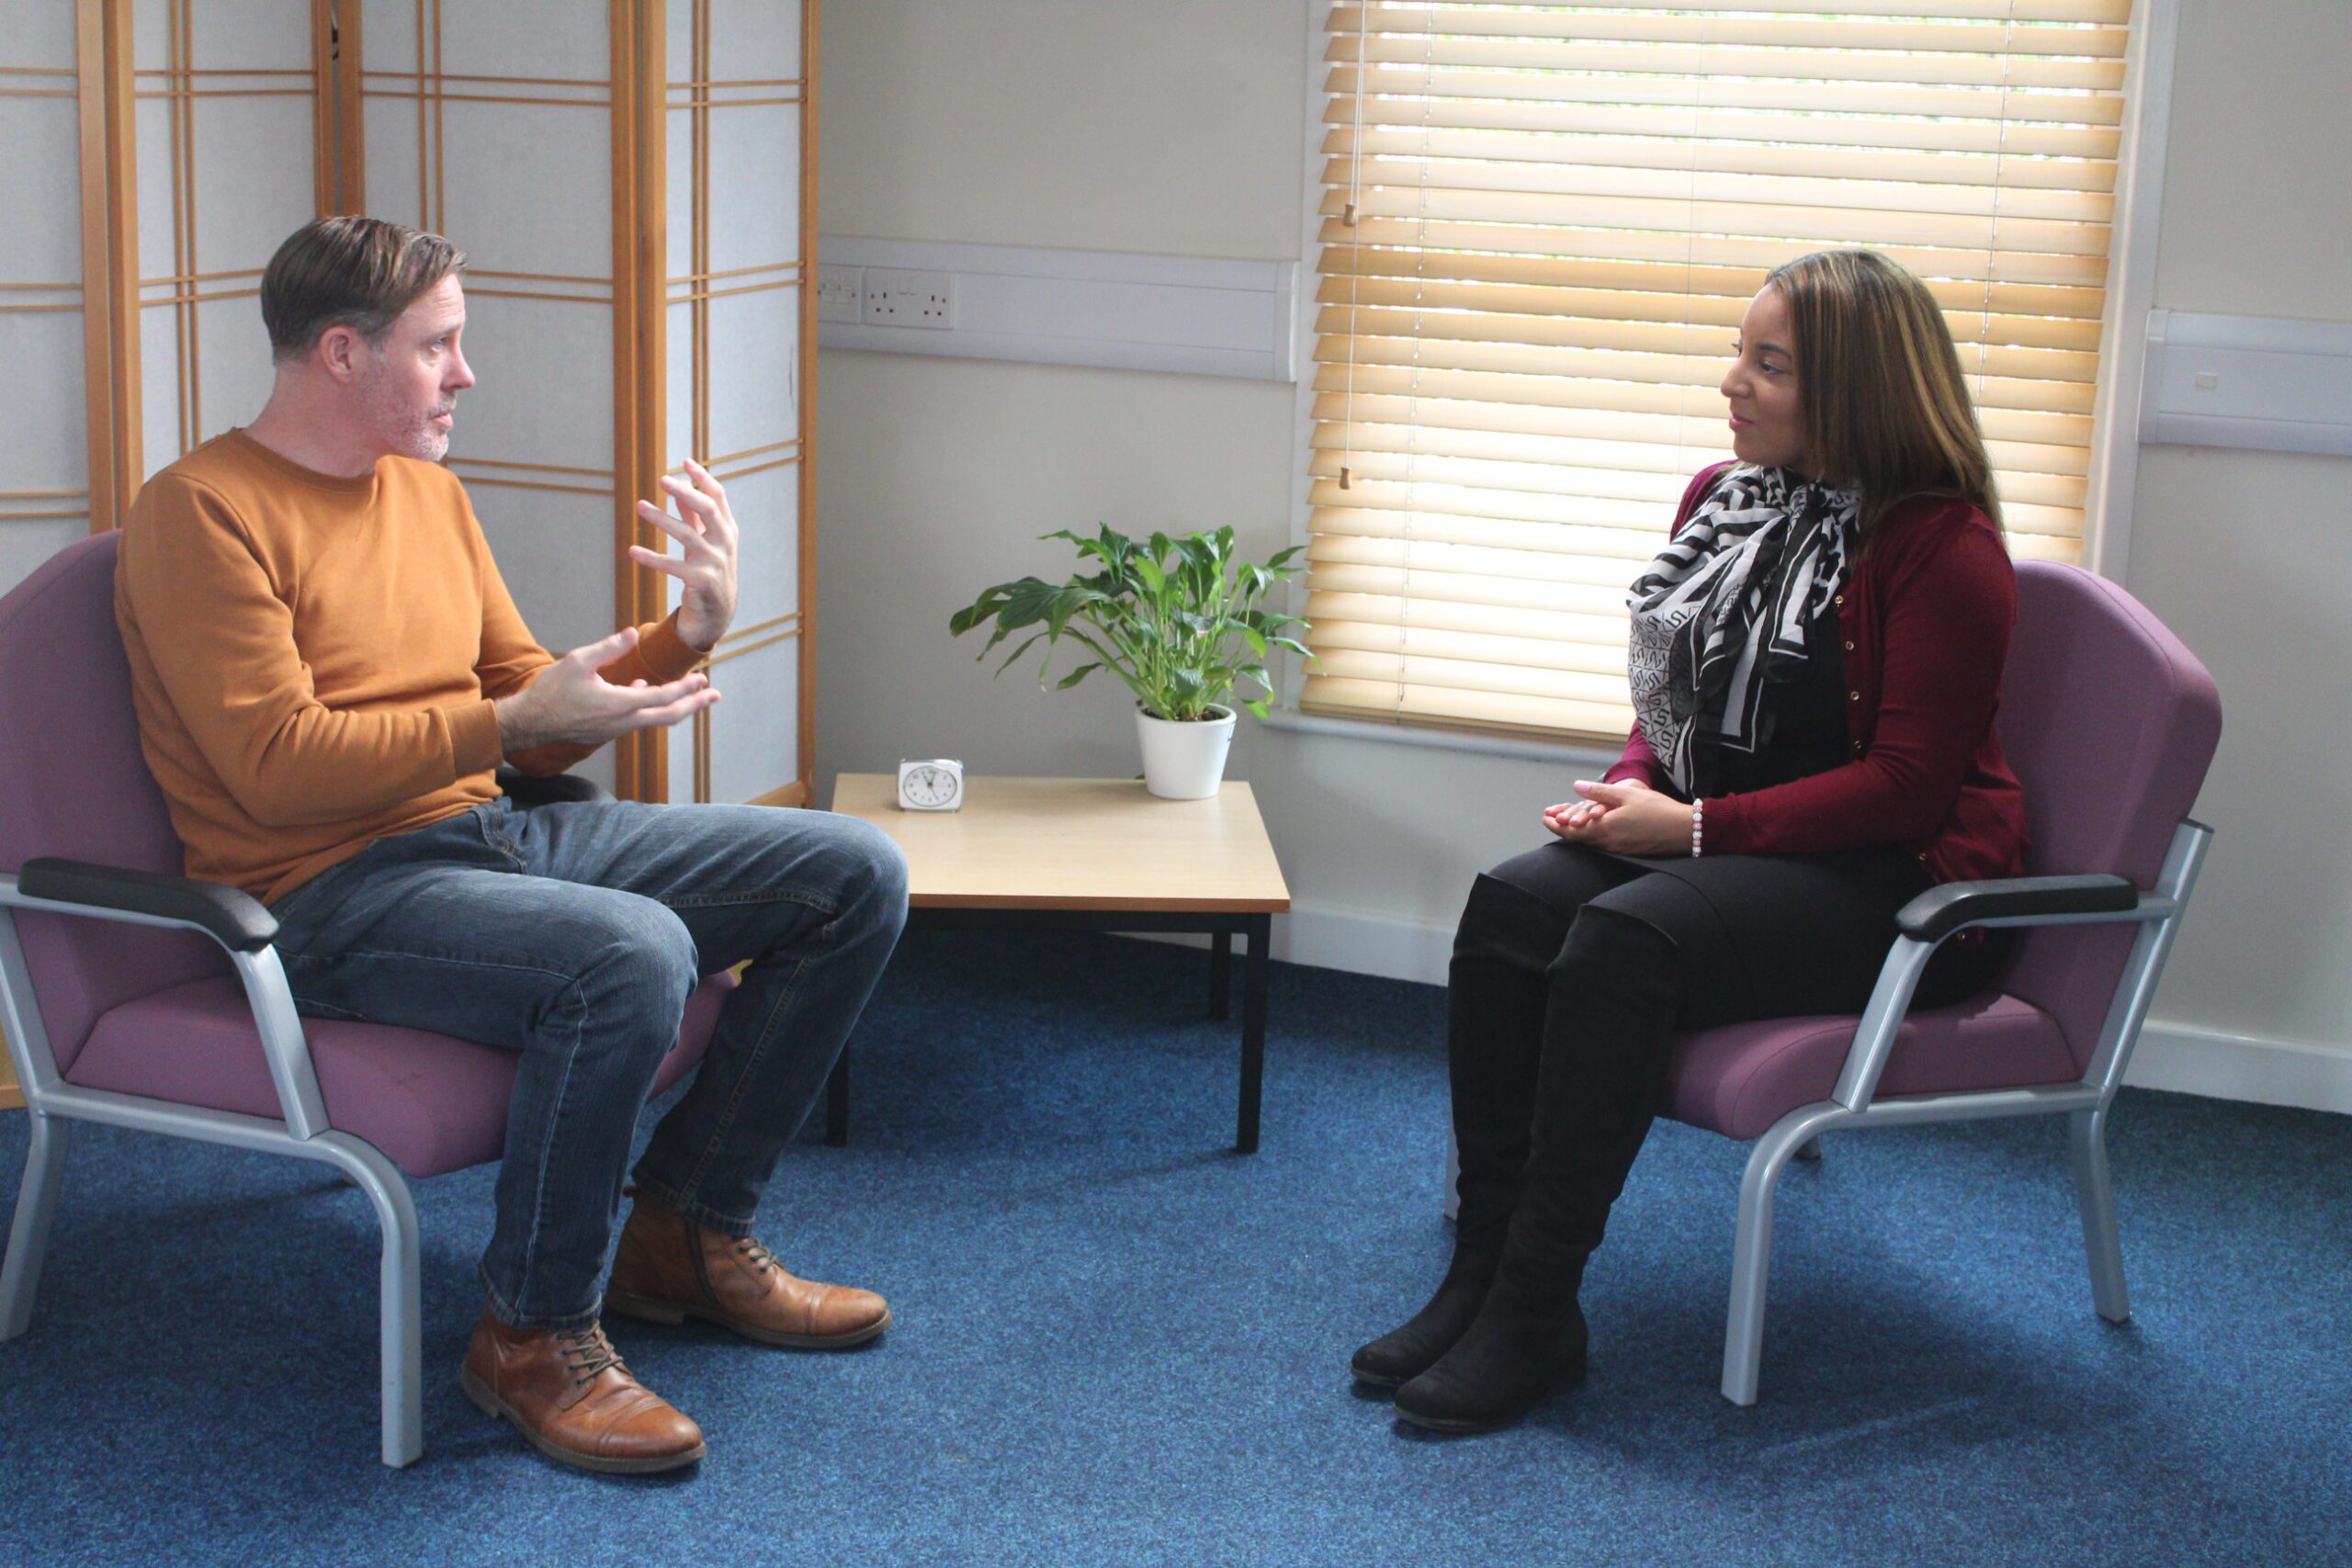 A man and a woman sit in a room in a counselling-style setting. The man is talking expressively to the woman.